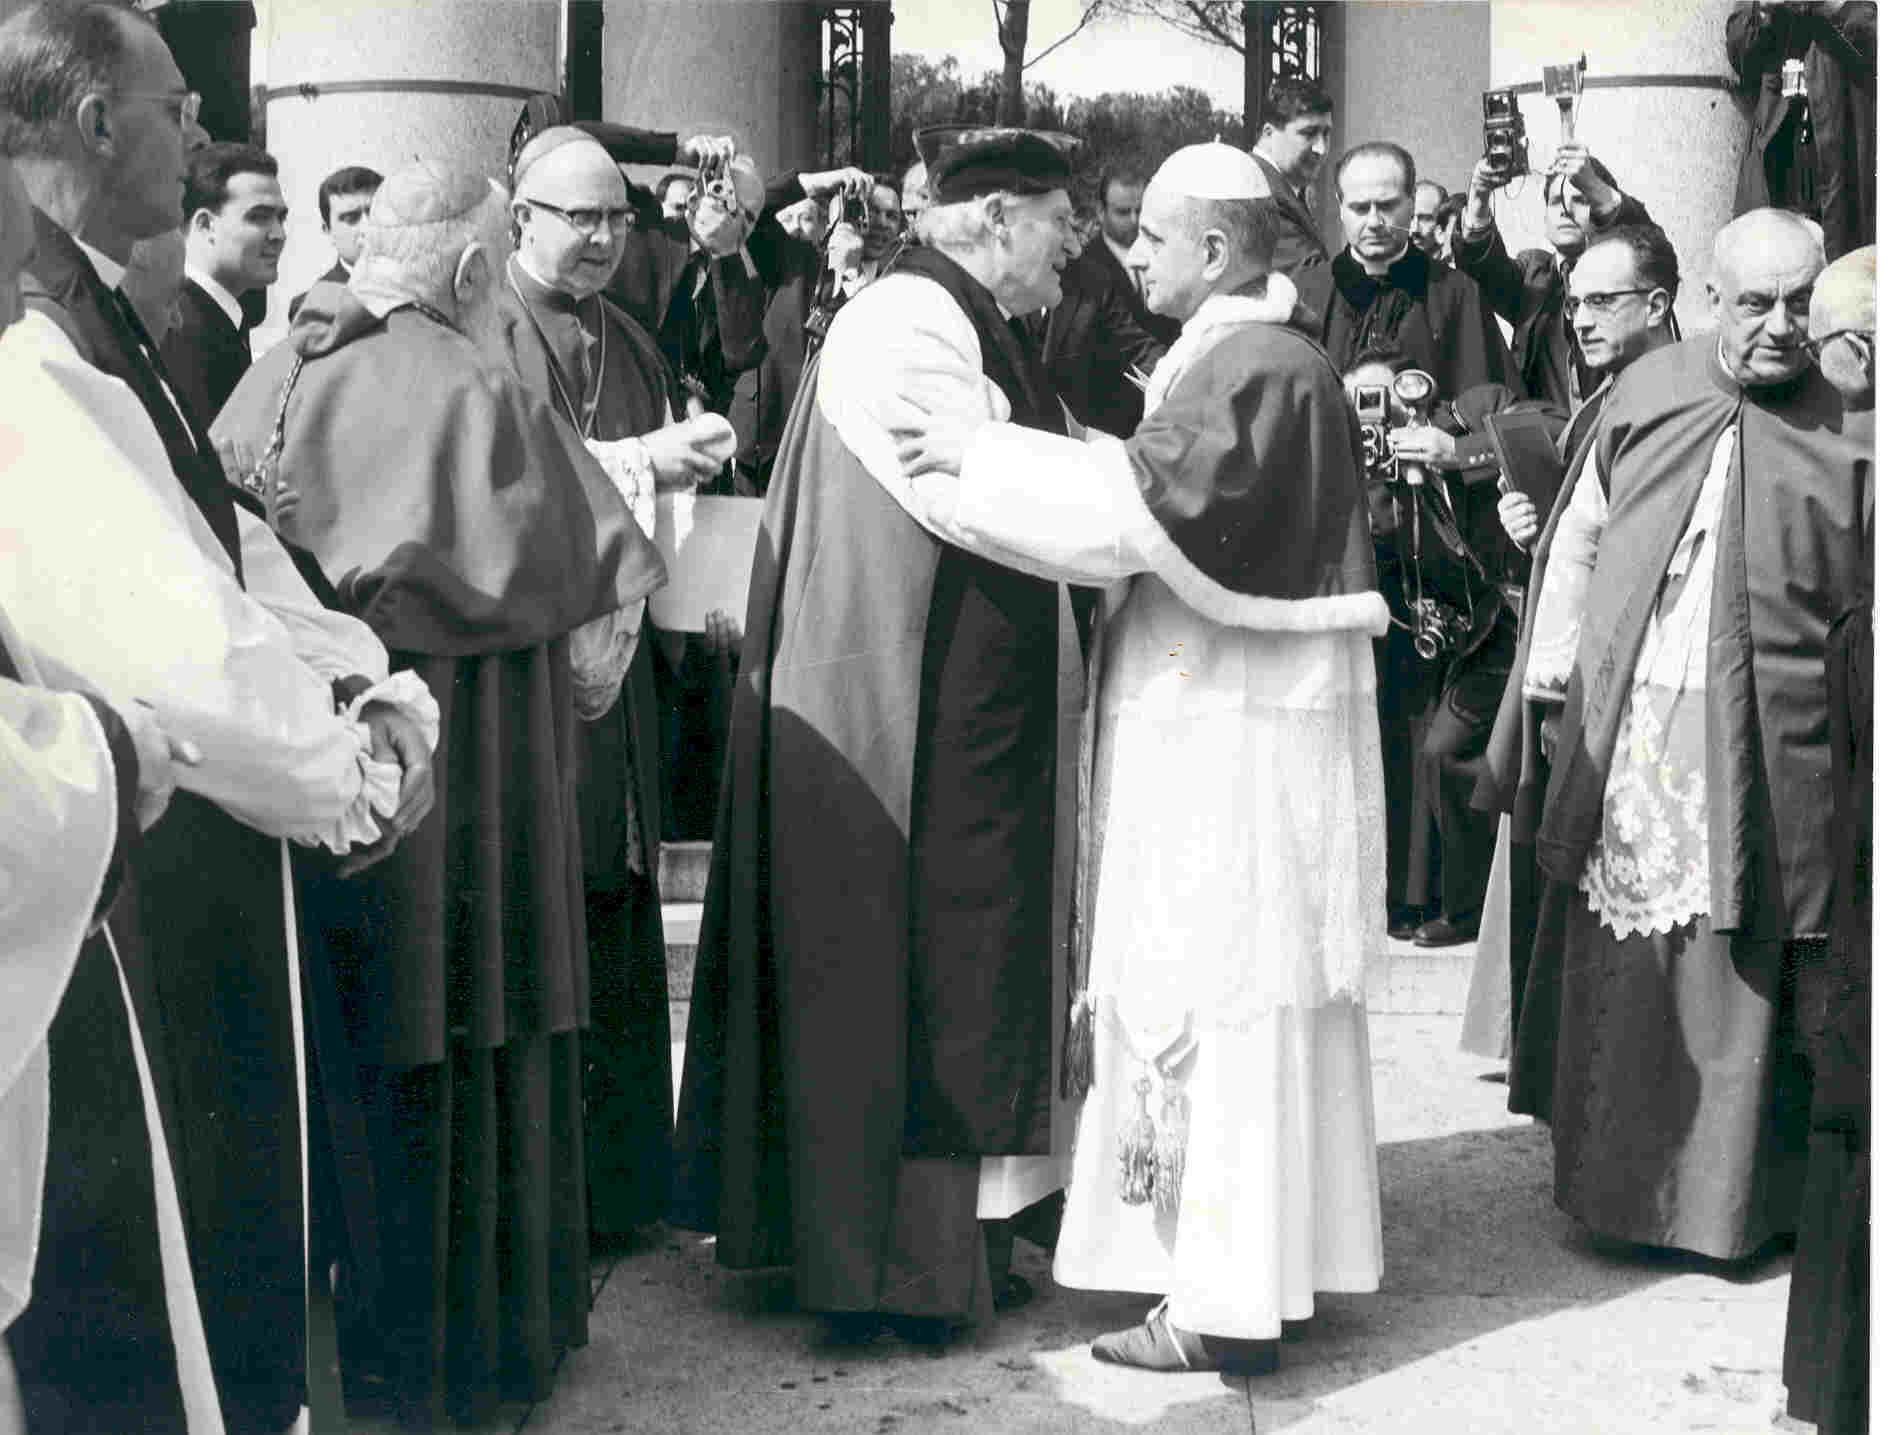 Pope Paul VI and Archbishop of Canterbury Michael Ramsey embracing during the visit of the Archbishop to Rome